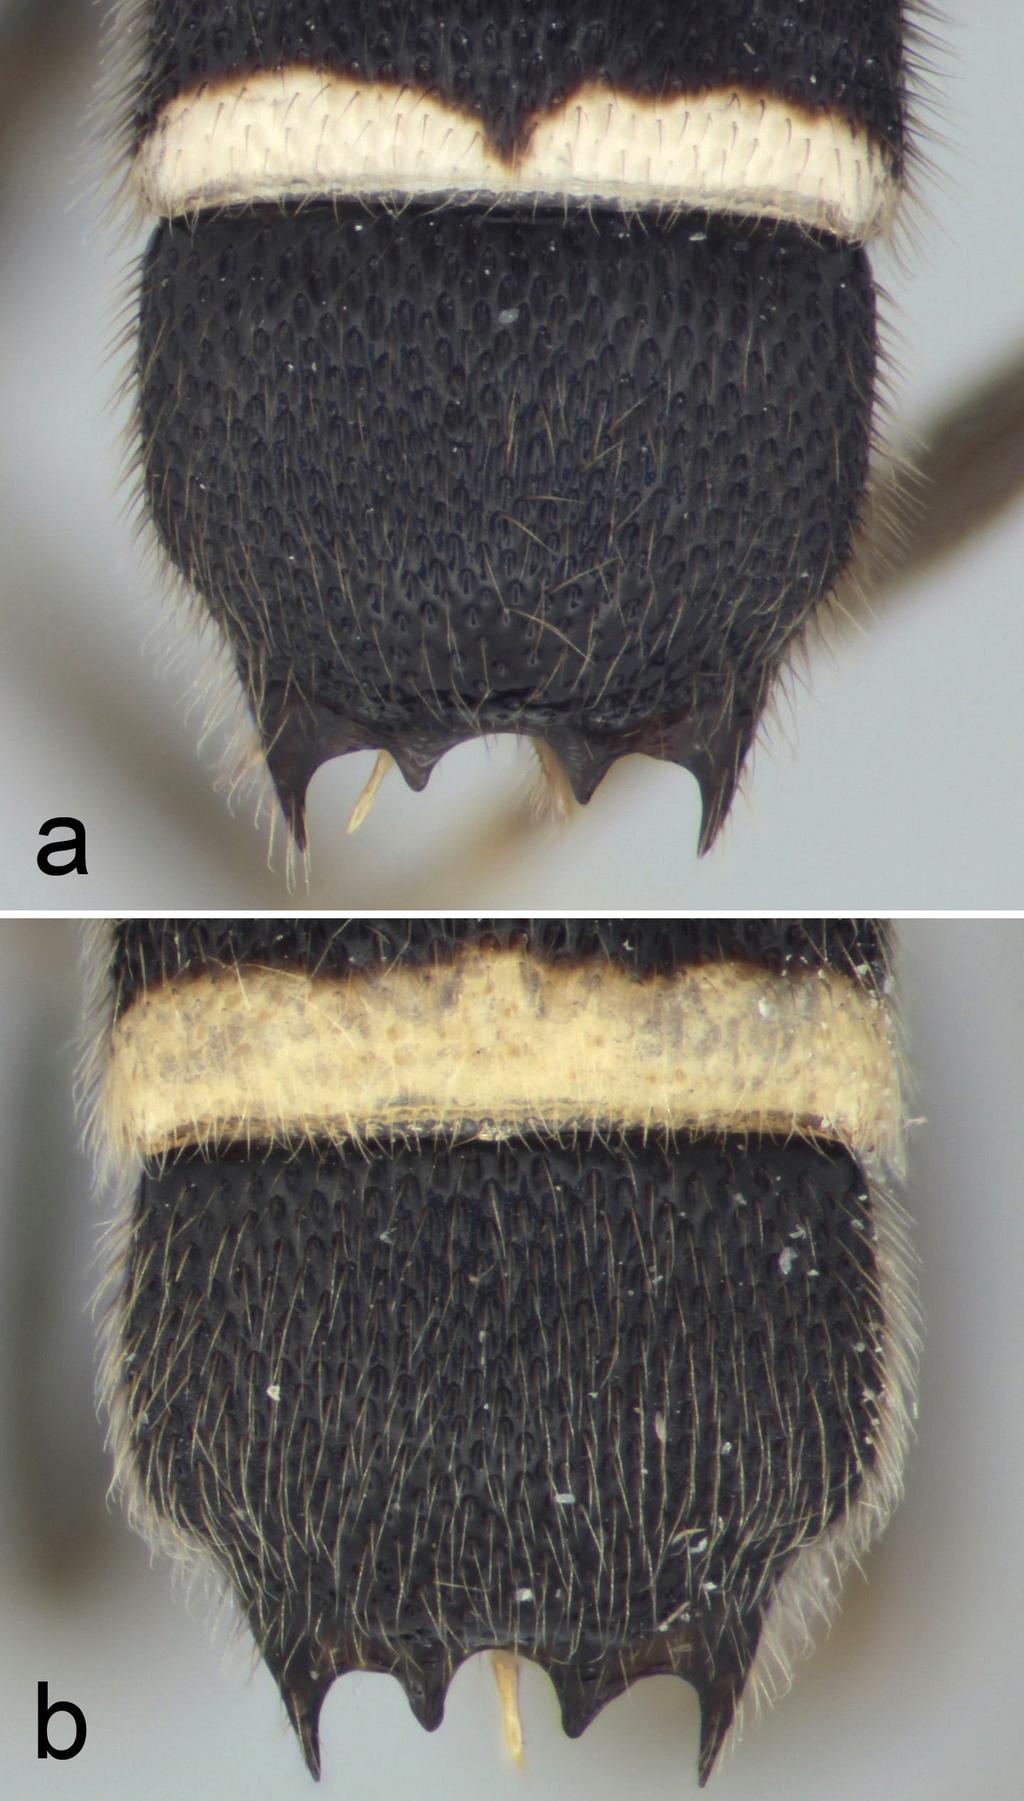 flange between projections; fifth to ninth tergites retracted beneath fourth tergite. Ovipositor very short, slender but not abruptly narrowed near base, with shallow, distal notch on upper valve.